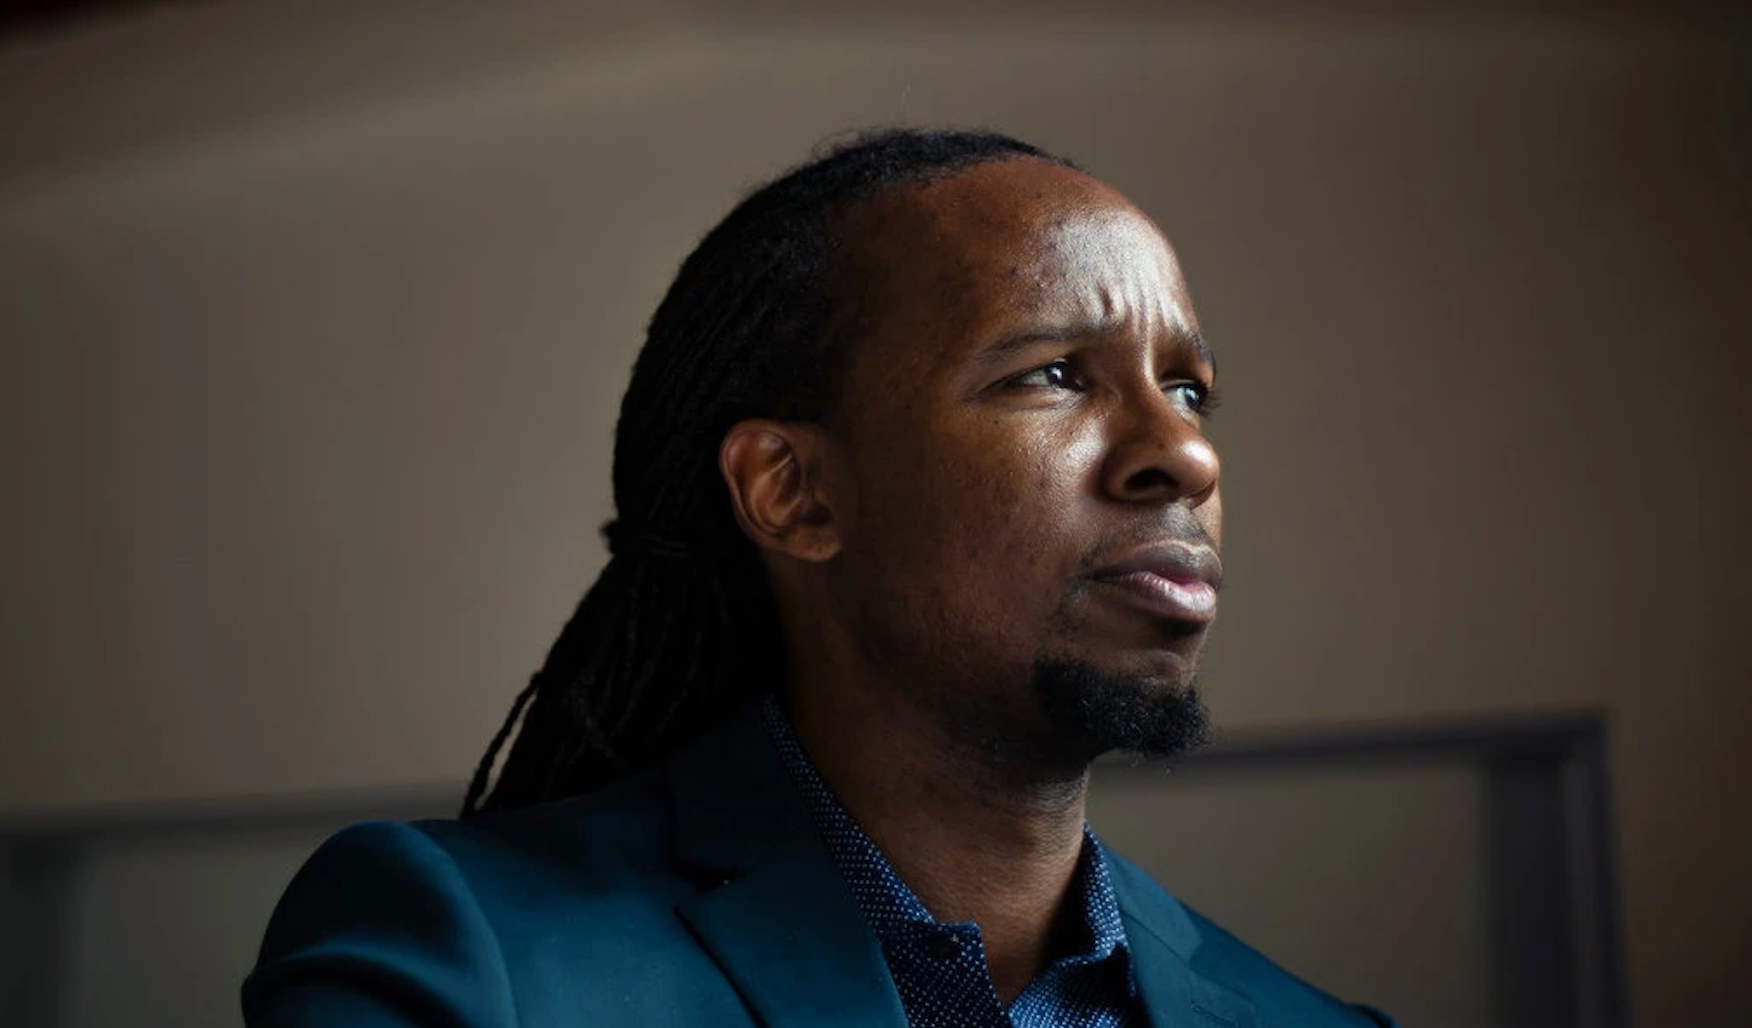 SCR: Ibram Kendi's Racism and Stanford's Hypocrisy